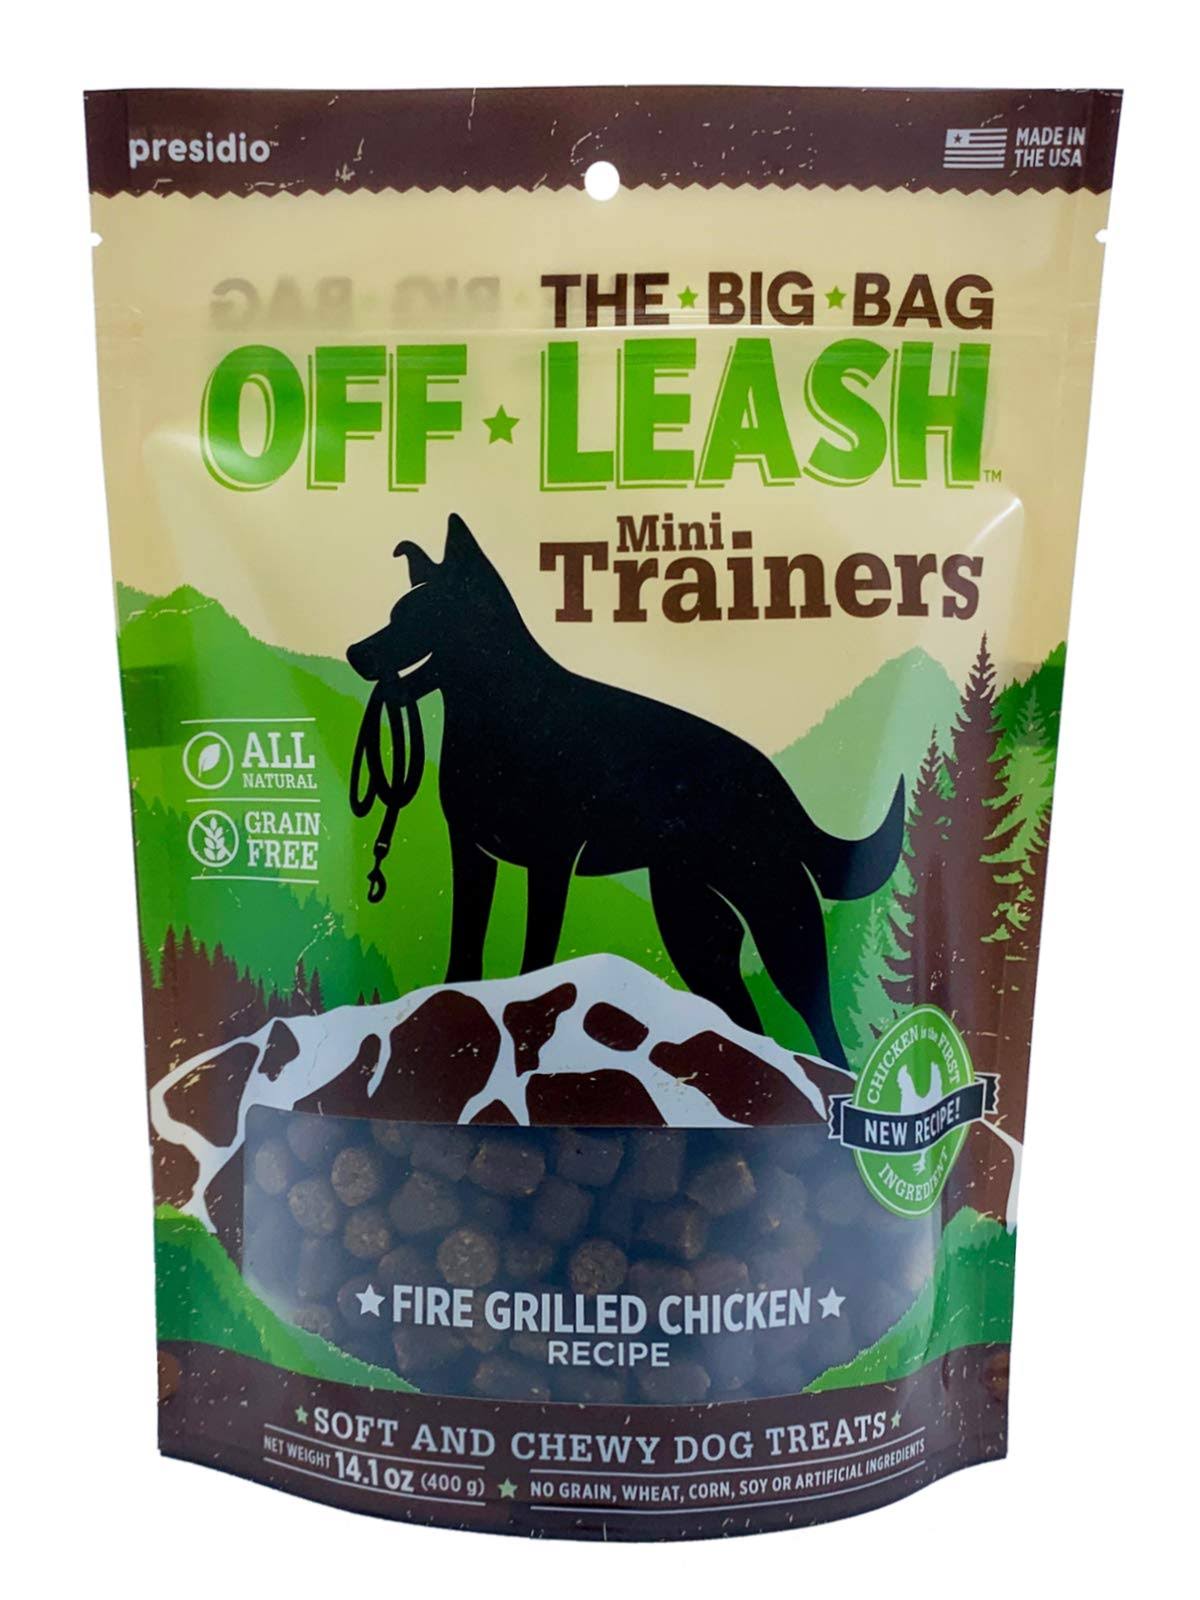 Off Leash Mini Trainers Dog Treats 14 oz / Grilled Chicken